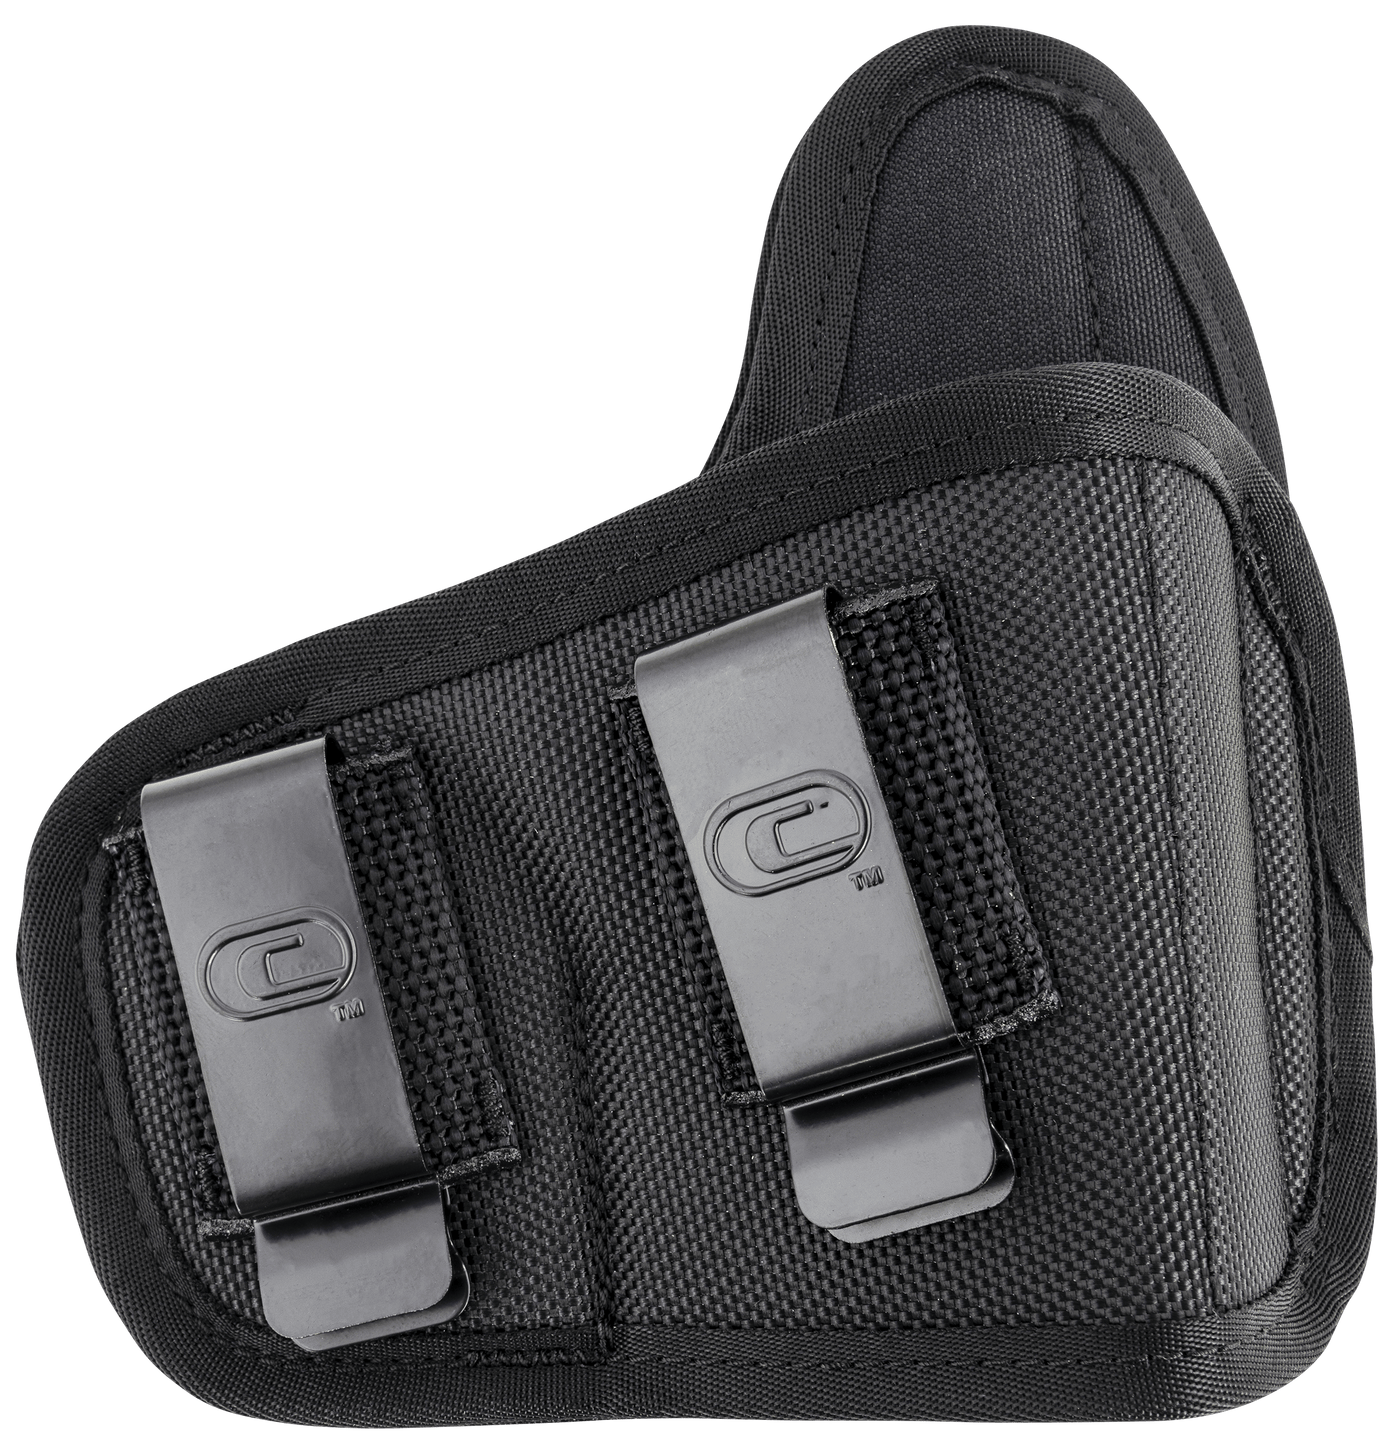 Crossfire Crossfire Cyclone Holster Sub-compact 2-2.5 In. Iwb/owb Rh Firearm Accessories